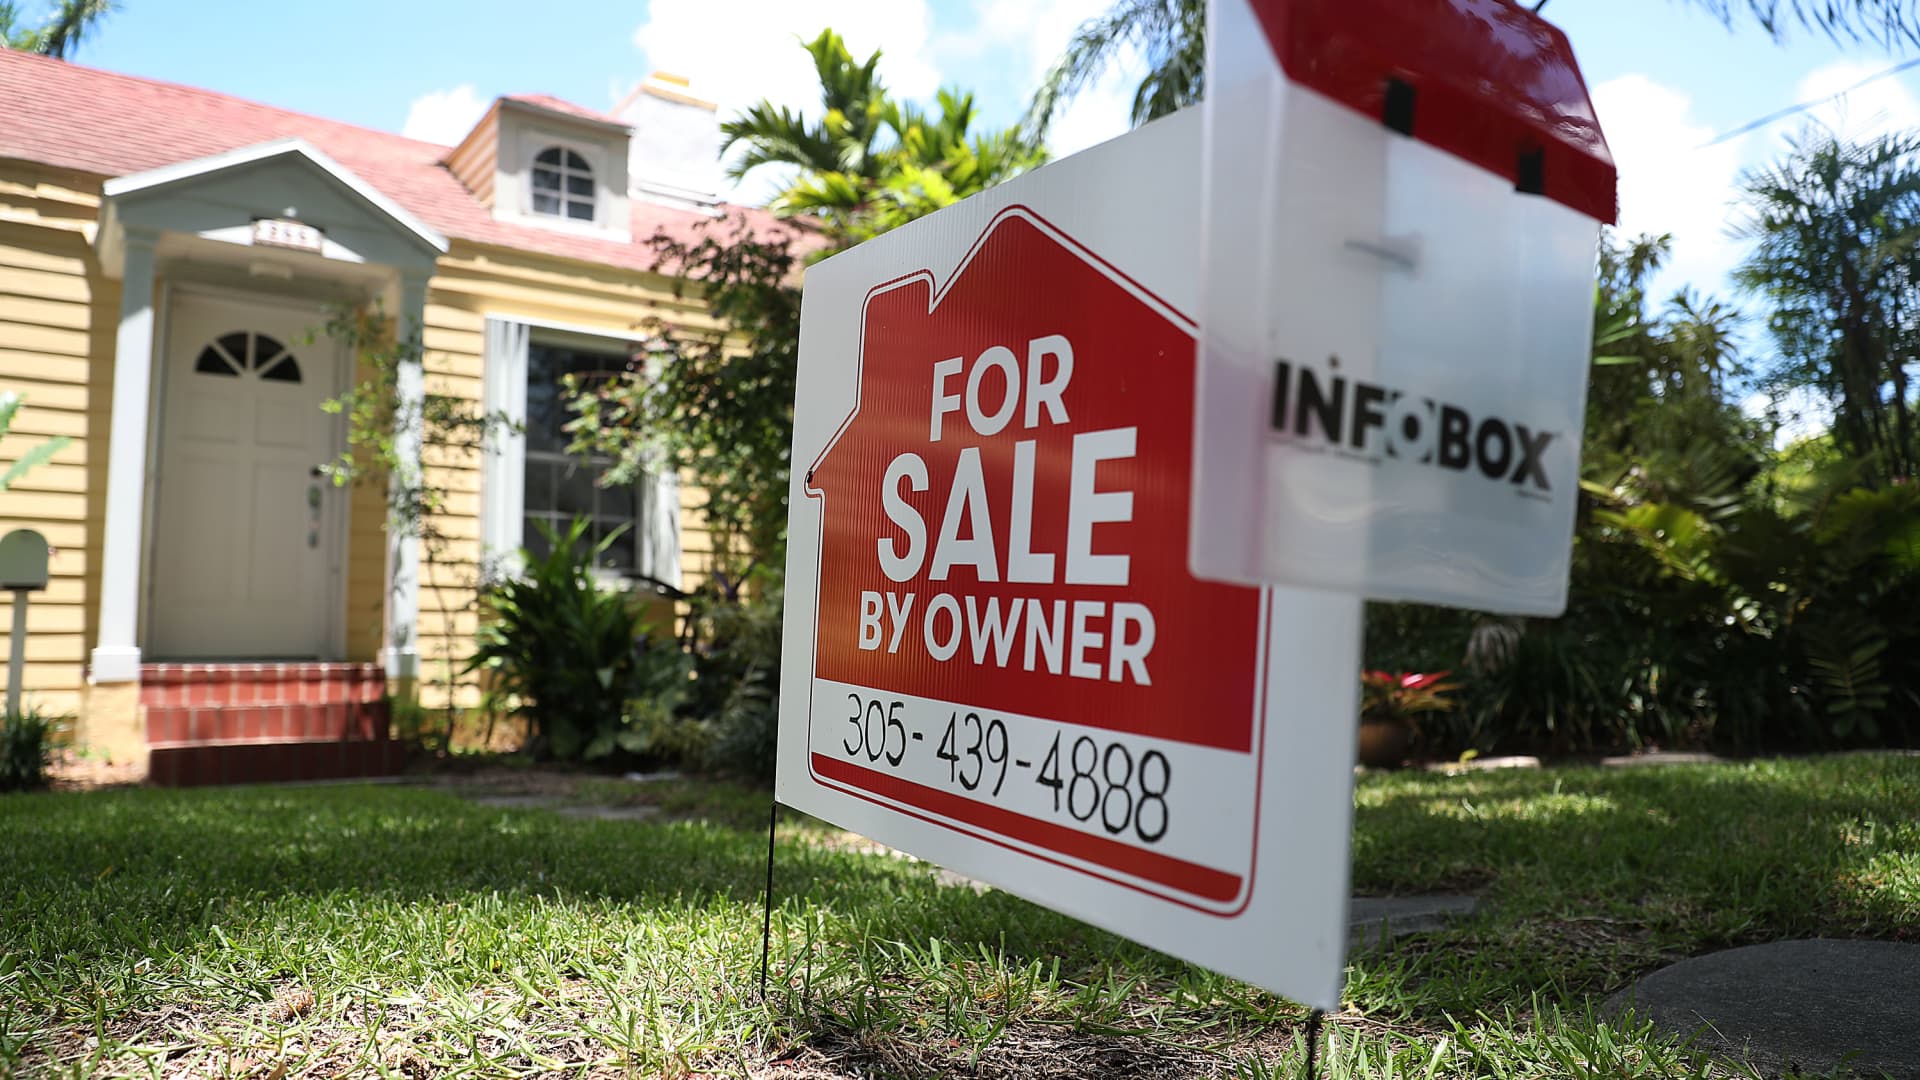 Home prices heated up to start the year, with huge surges in Arizona and Florida, says S&P Case-Shiller report